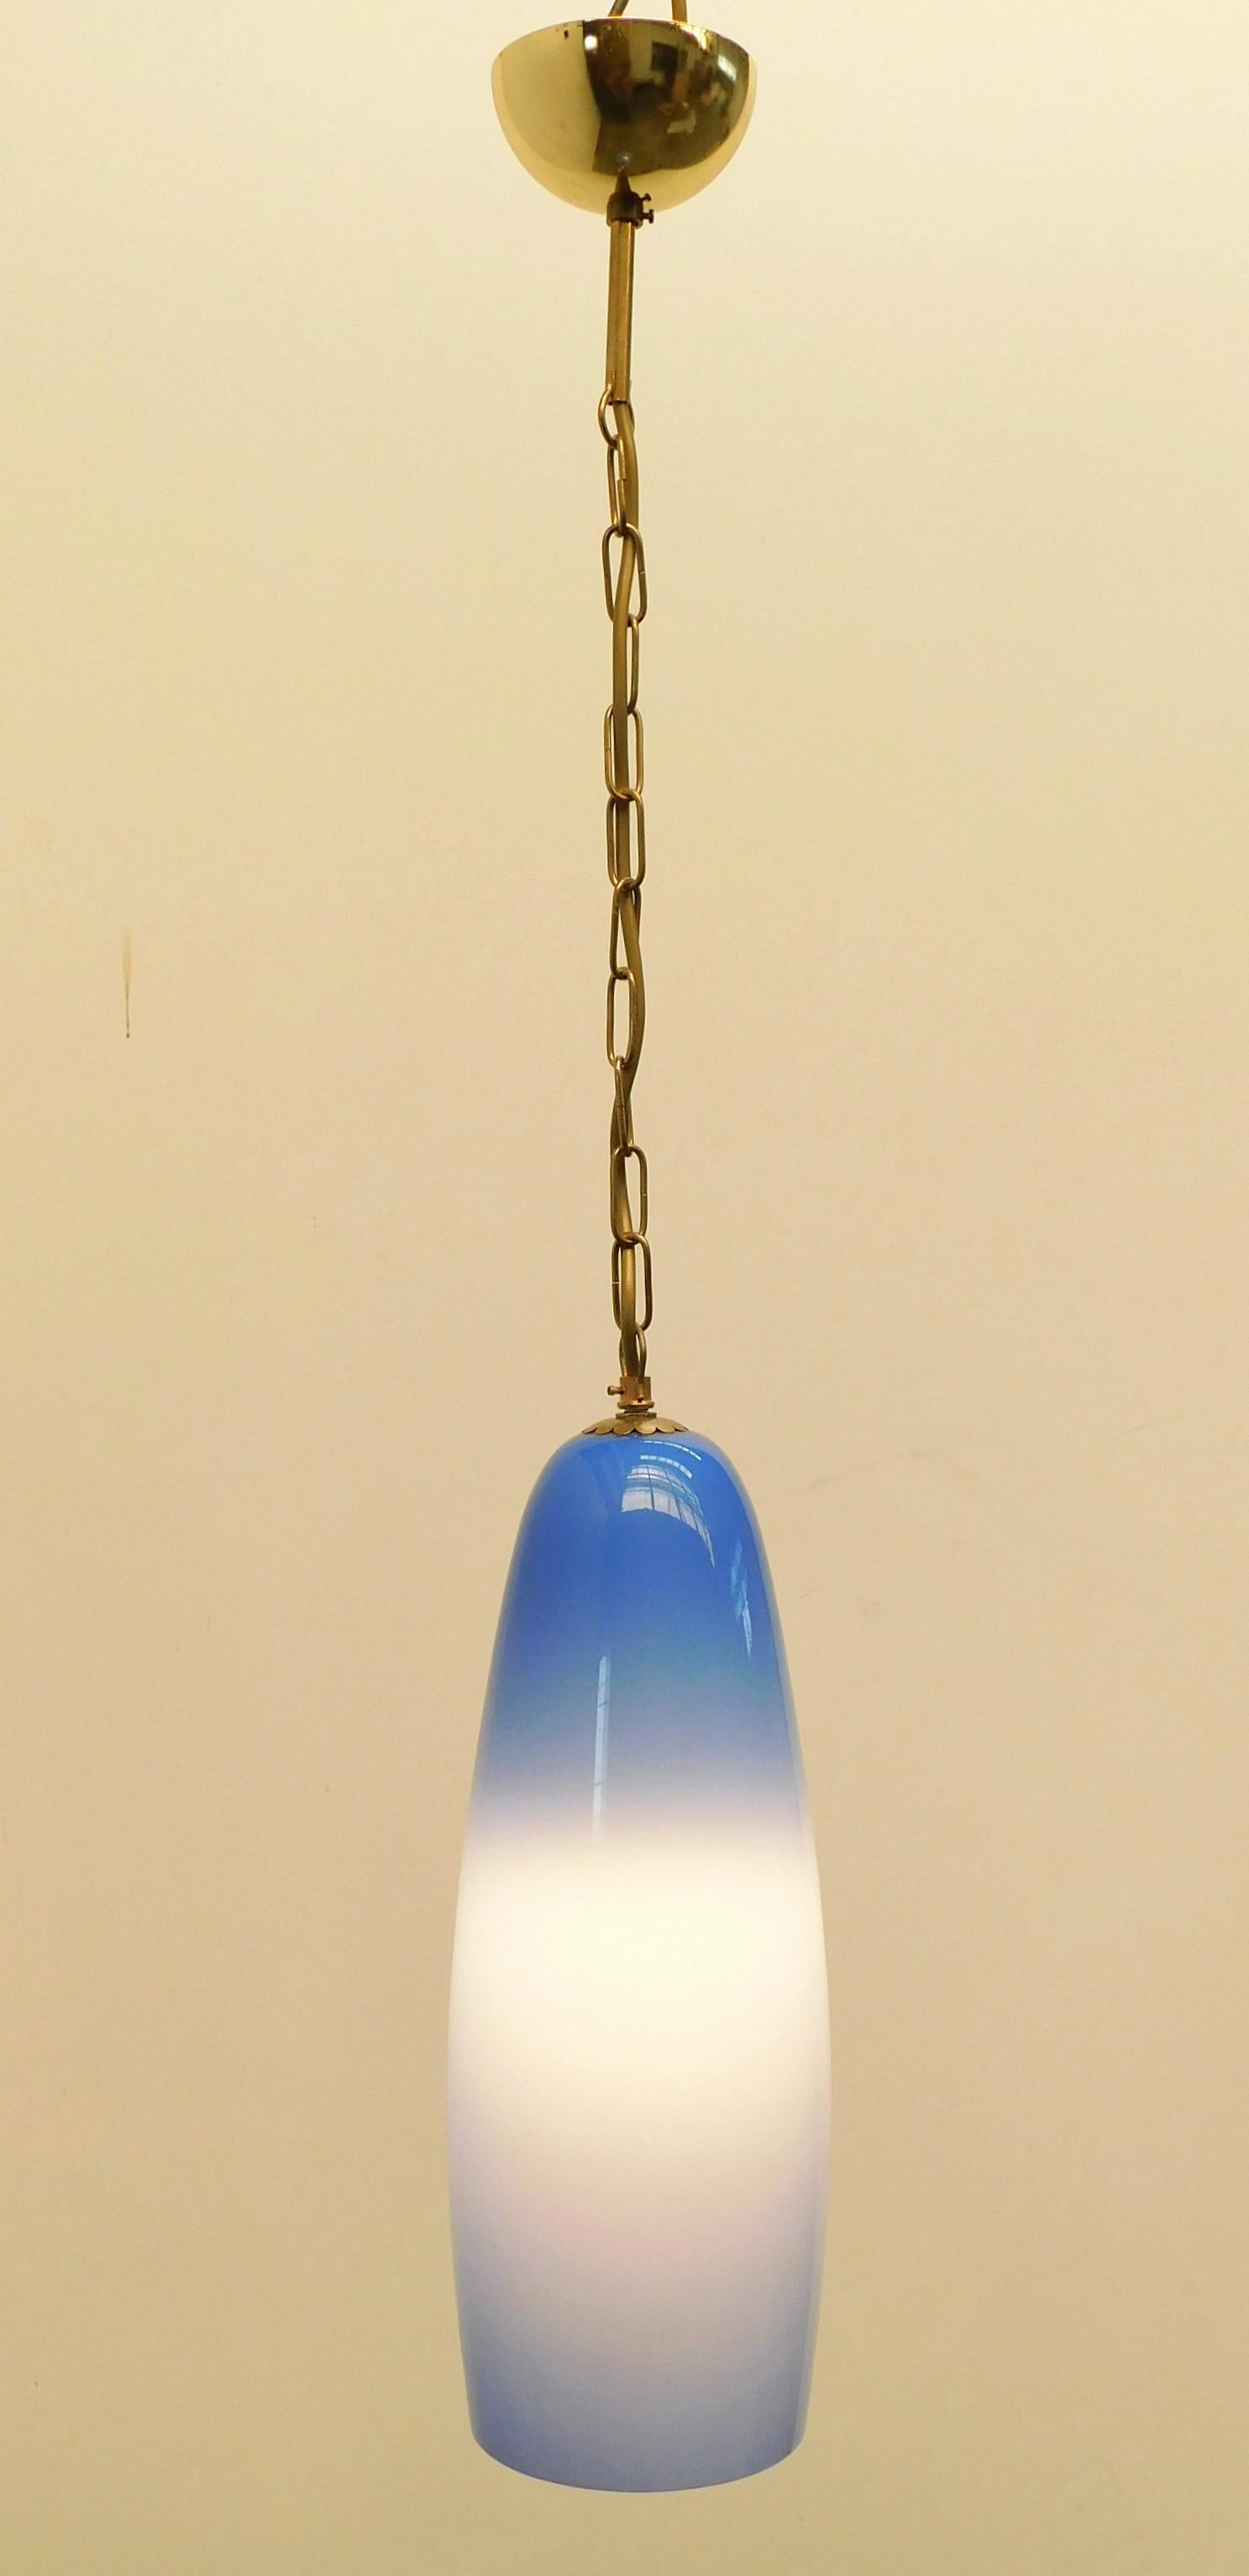 Vintage Italian pendant with hand blown Murano glass frosted white interior and sapphire blue exterior using Incamiciato technique, mounted on brass hardware / Designed by Leucos, circa 1970s / Made in Italy
1 light / E26 or E27 type / max